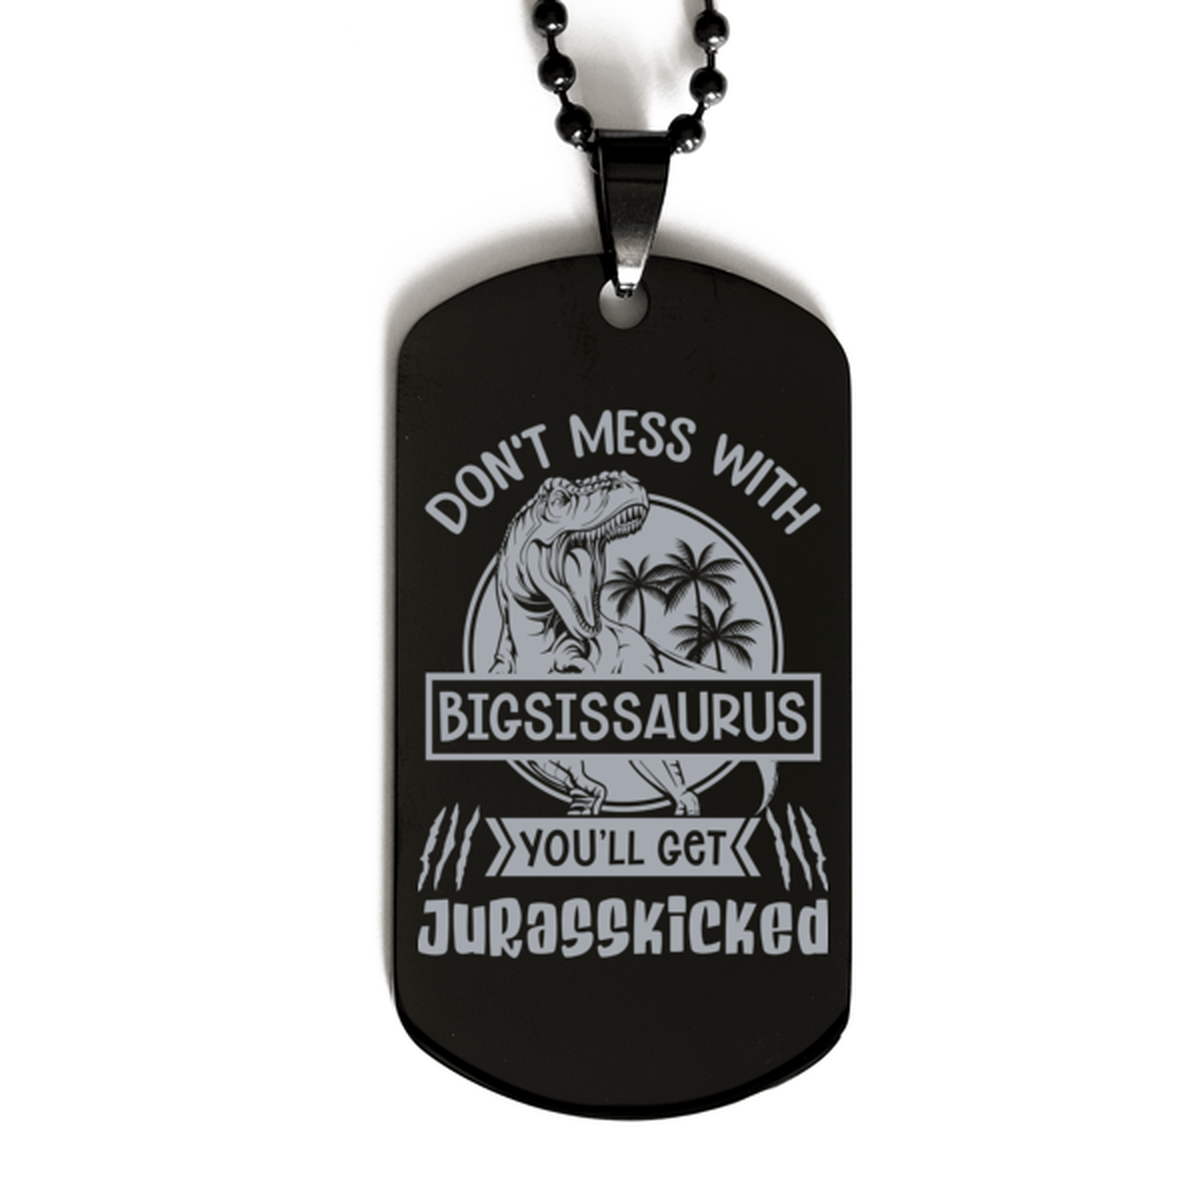 Don't Mess with Bigsissaurus You'll Get Jurasskicked Black Dog Tag Necklace - Funny Dinosaur Gift for Big Sister - Big Sis Birthday